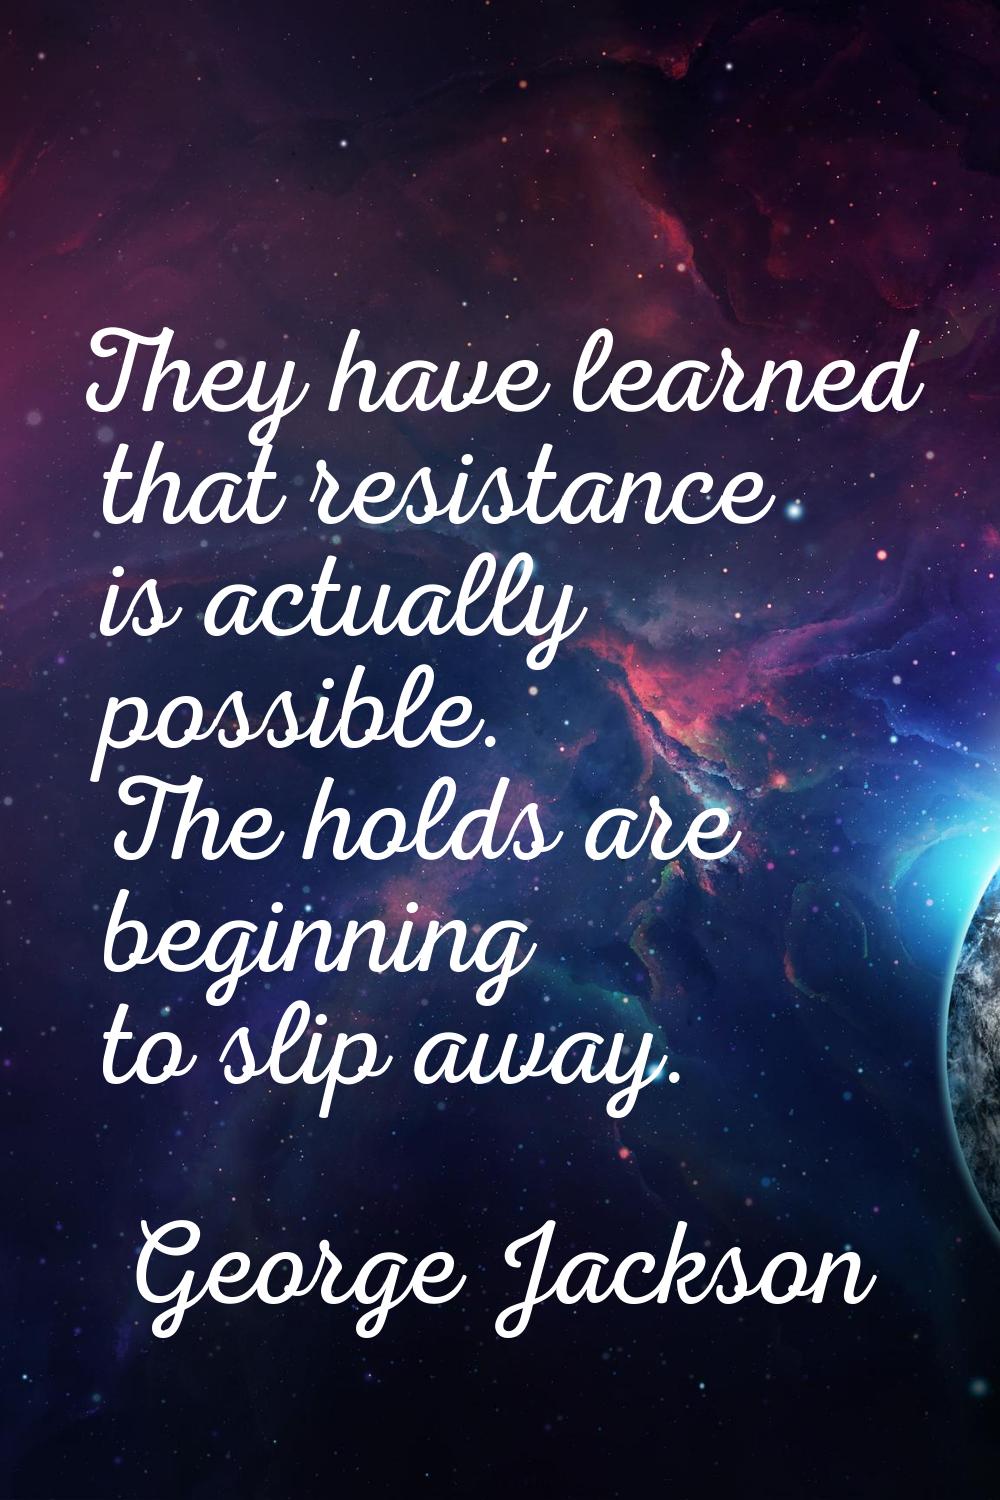 They have learned that resistance is actually possible. The holds are beginning to slip away.